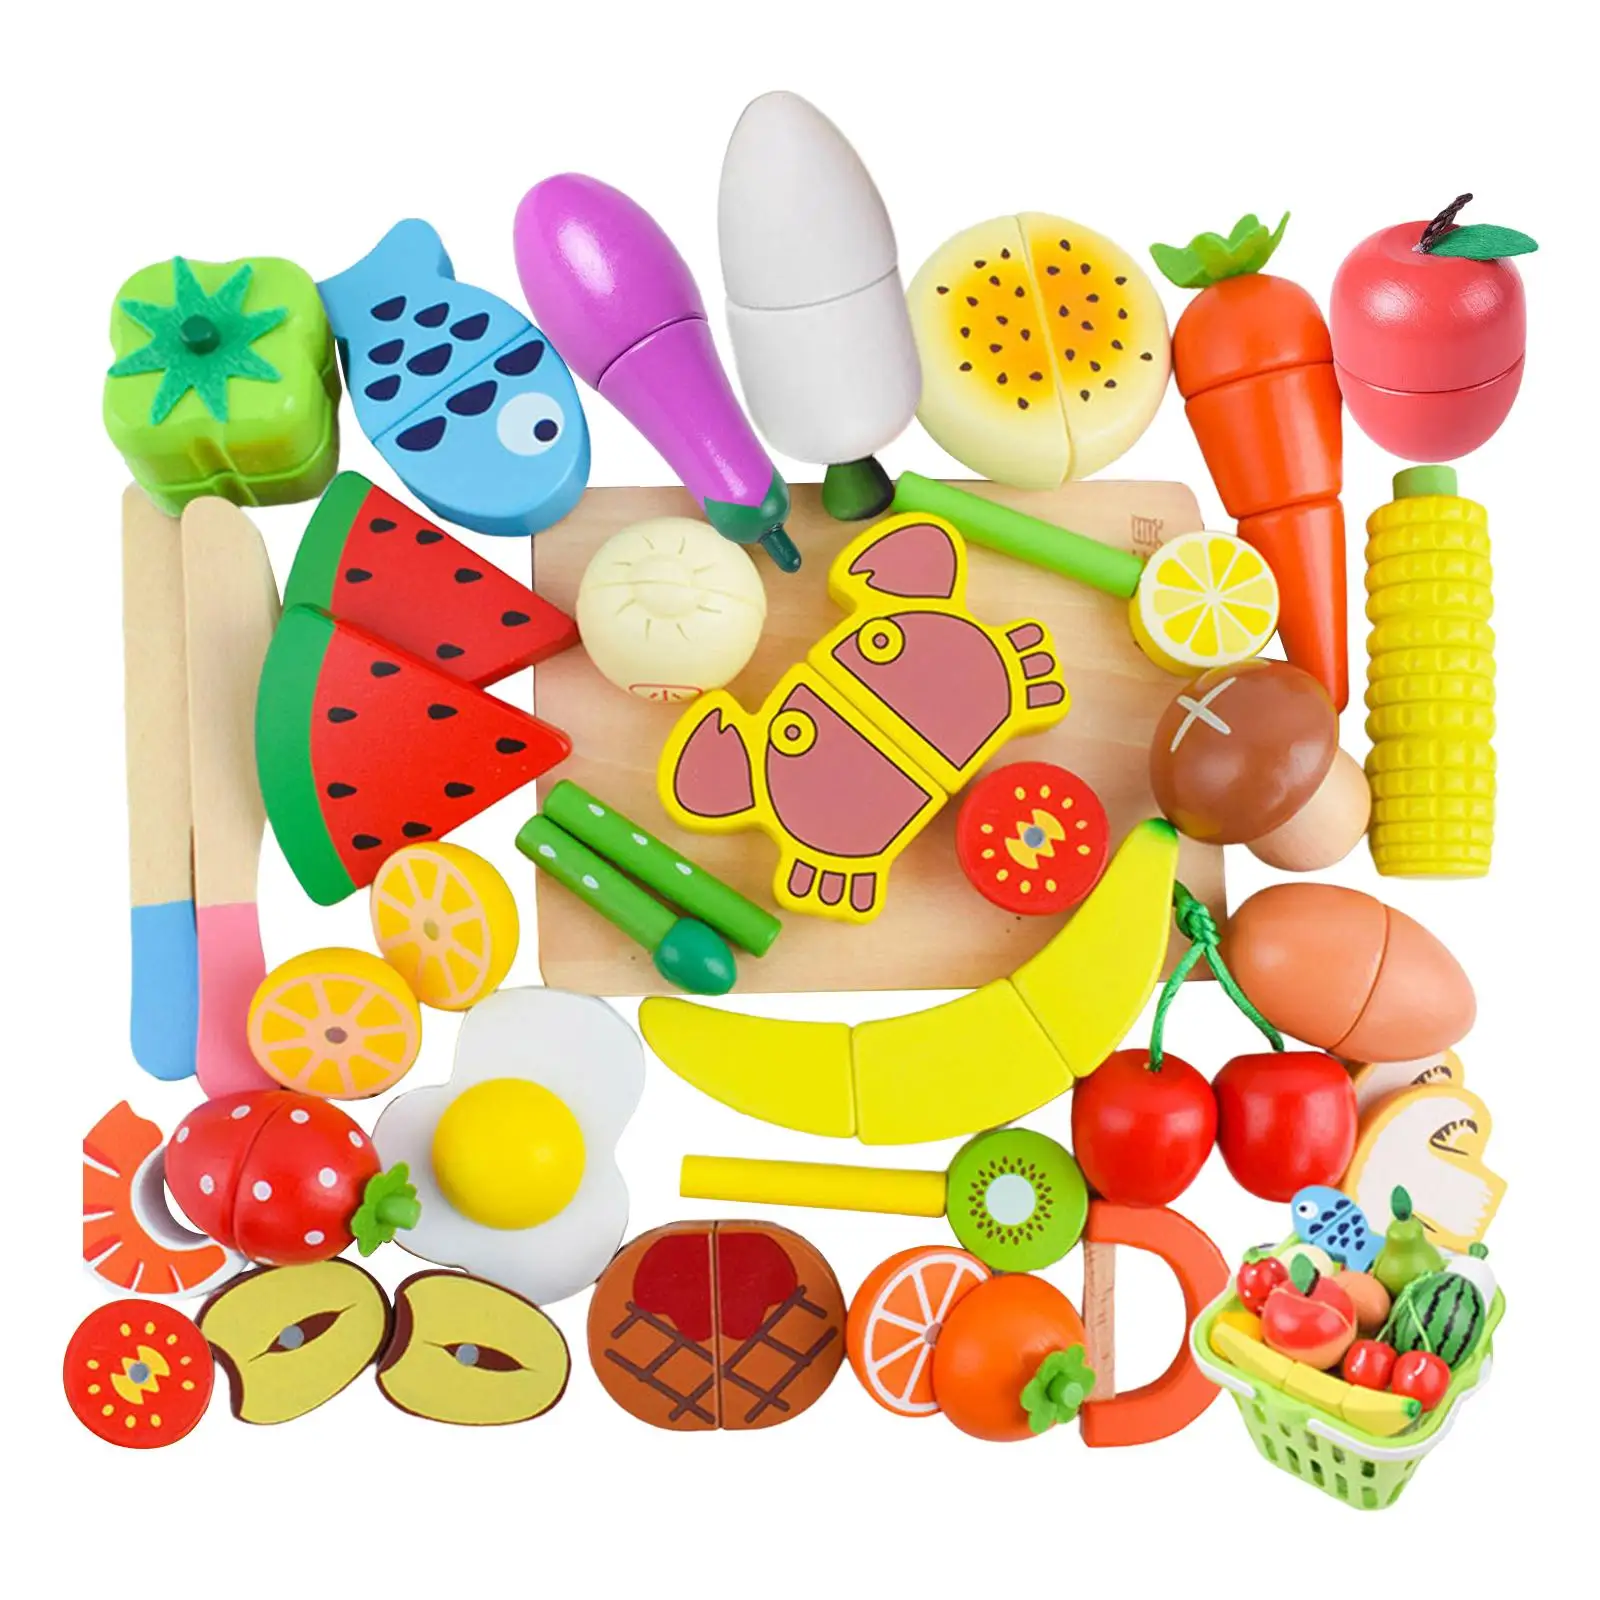 35x Cutting Fruit Vegetables Set Cutting Food Kitchen Toys Pretend Play Wooden Play Kitchen Toys for Girls Children Boys Ages 3+